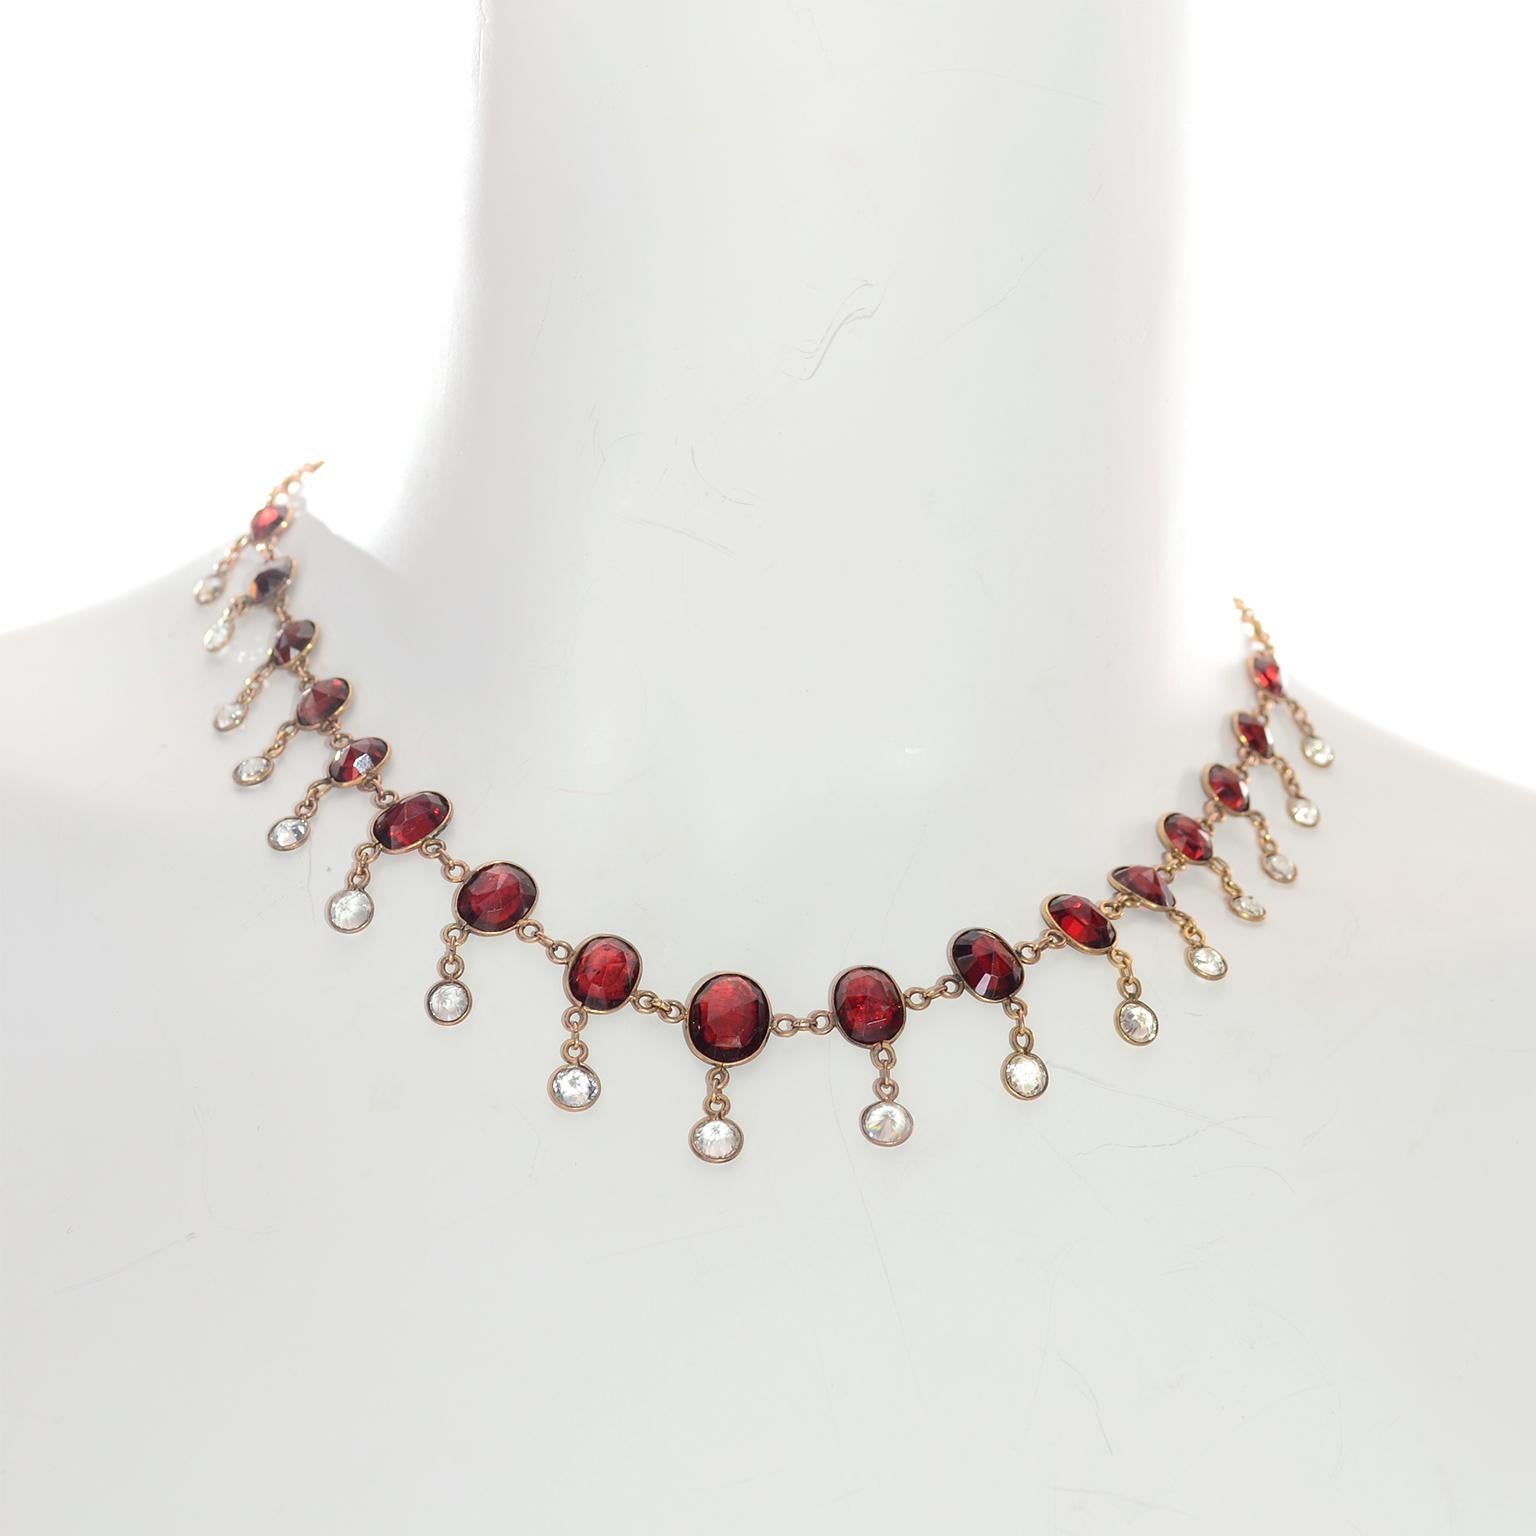 This stunning Victorian  necklace is fringe style with graduated size oval red faceted garnets and clear round faceted crystal drops set in 9k rose gold. Unmarked but tested gold. 

Garnets range in size from 5x7mm to 9x11mm.
The necklace is 16